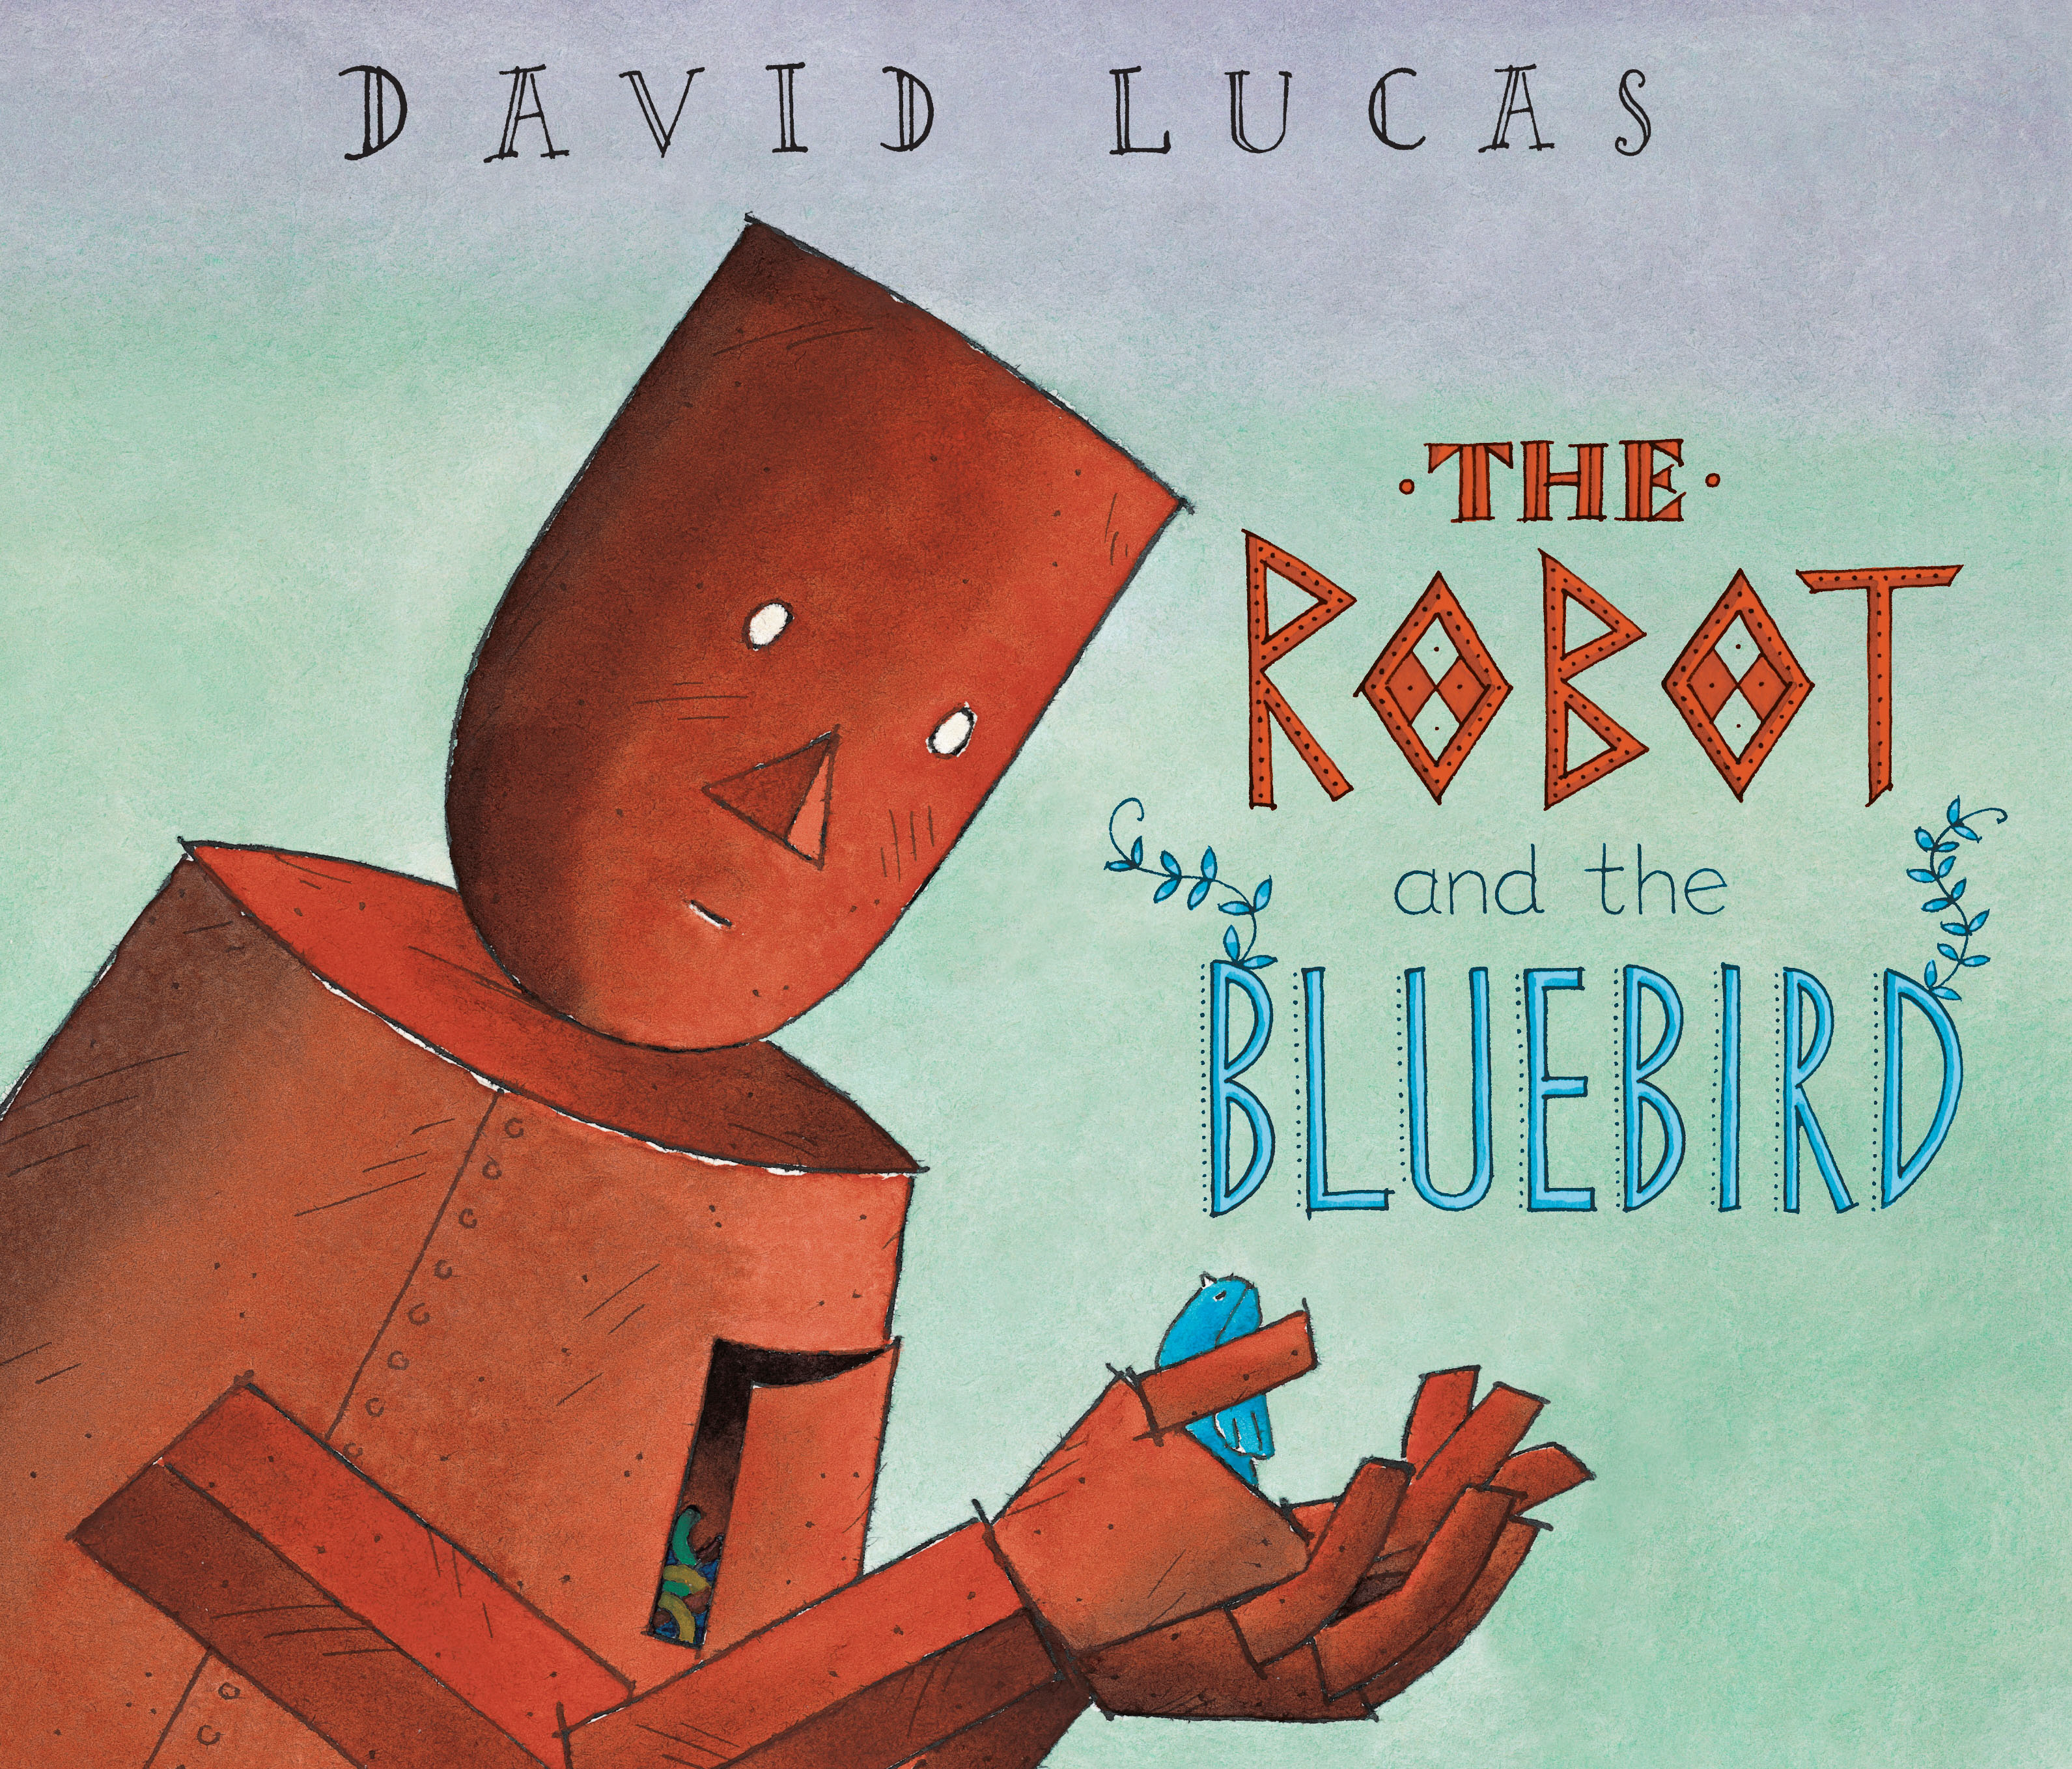 The Robot and the Bluebird